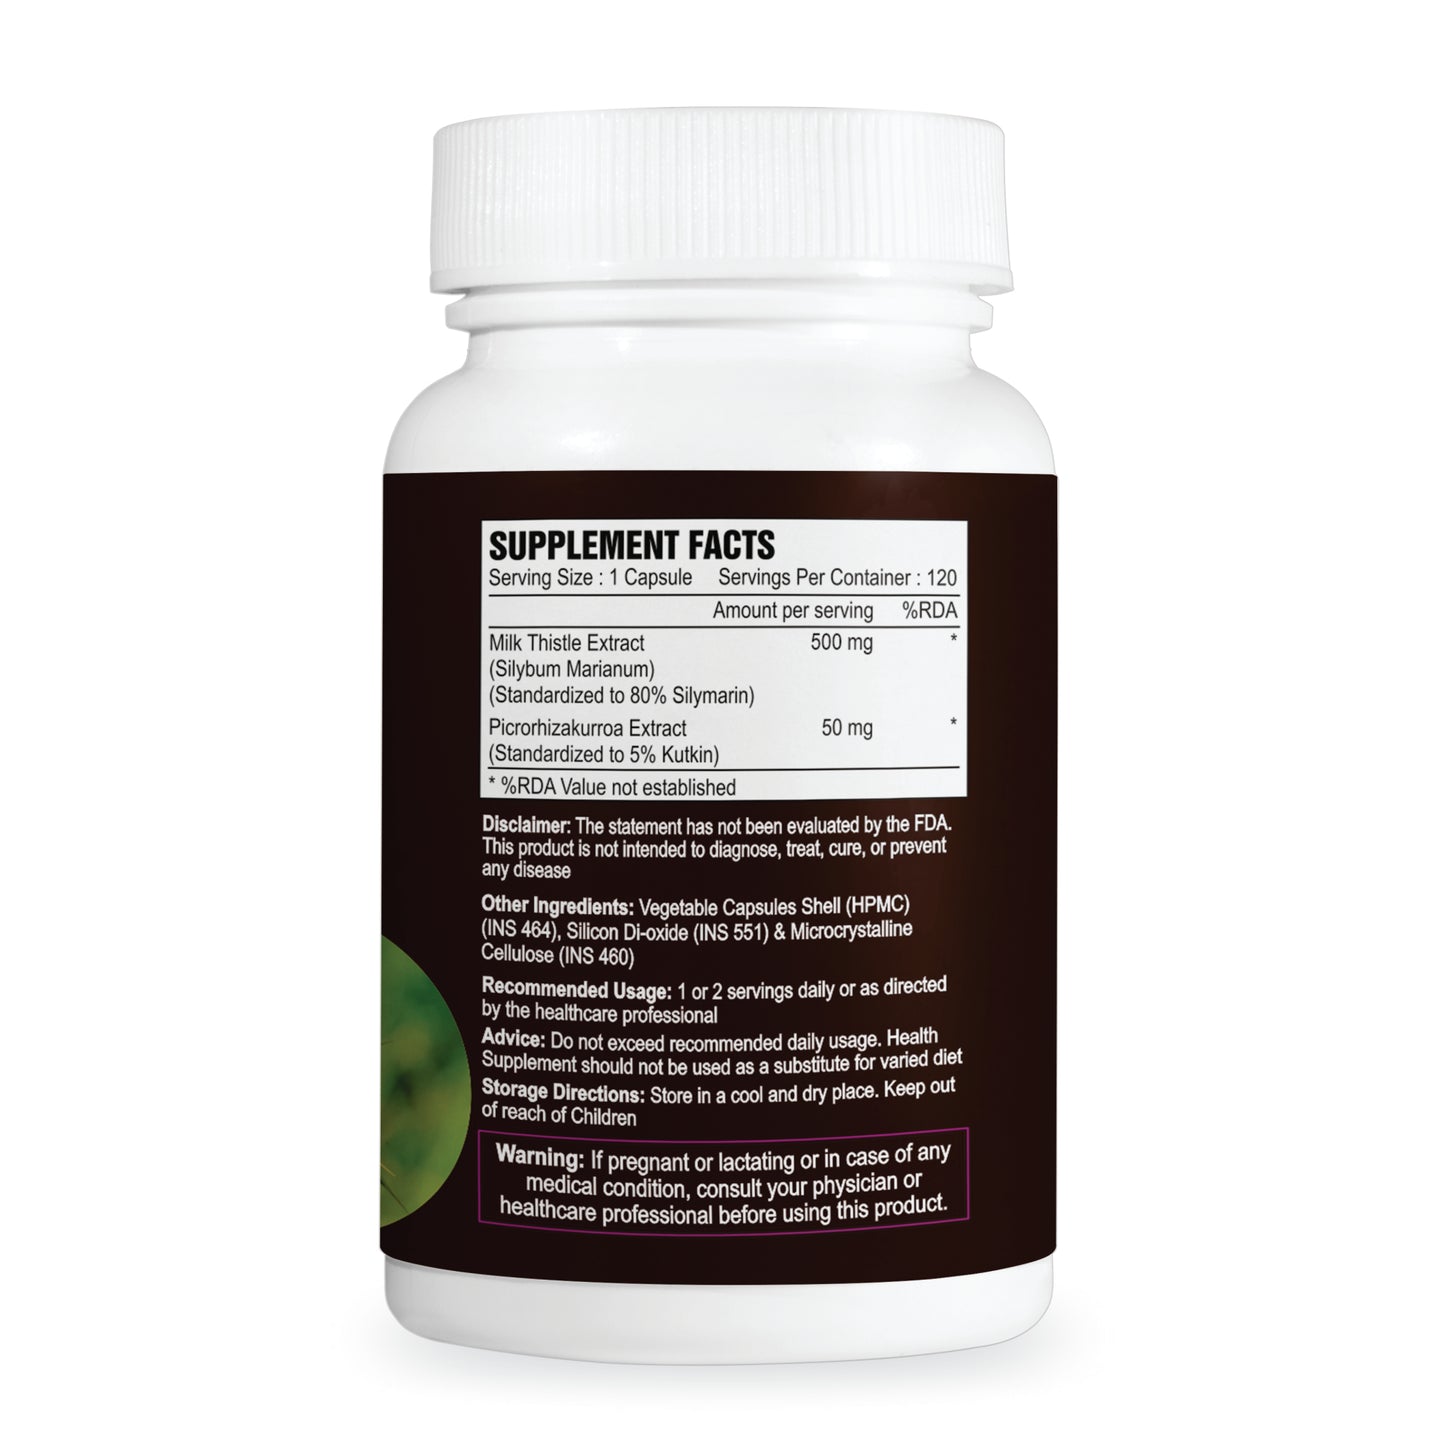 Liver Support with Milk Thistle Tablets for Detox & Health